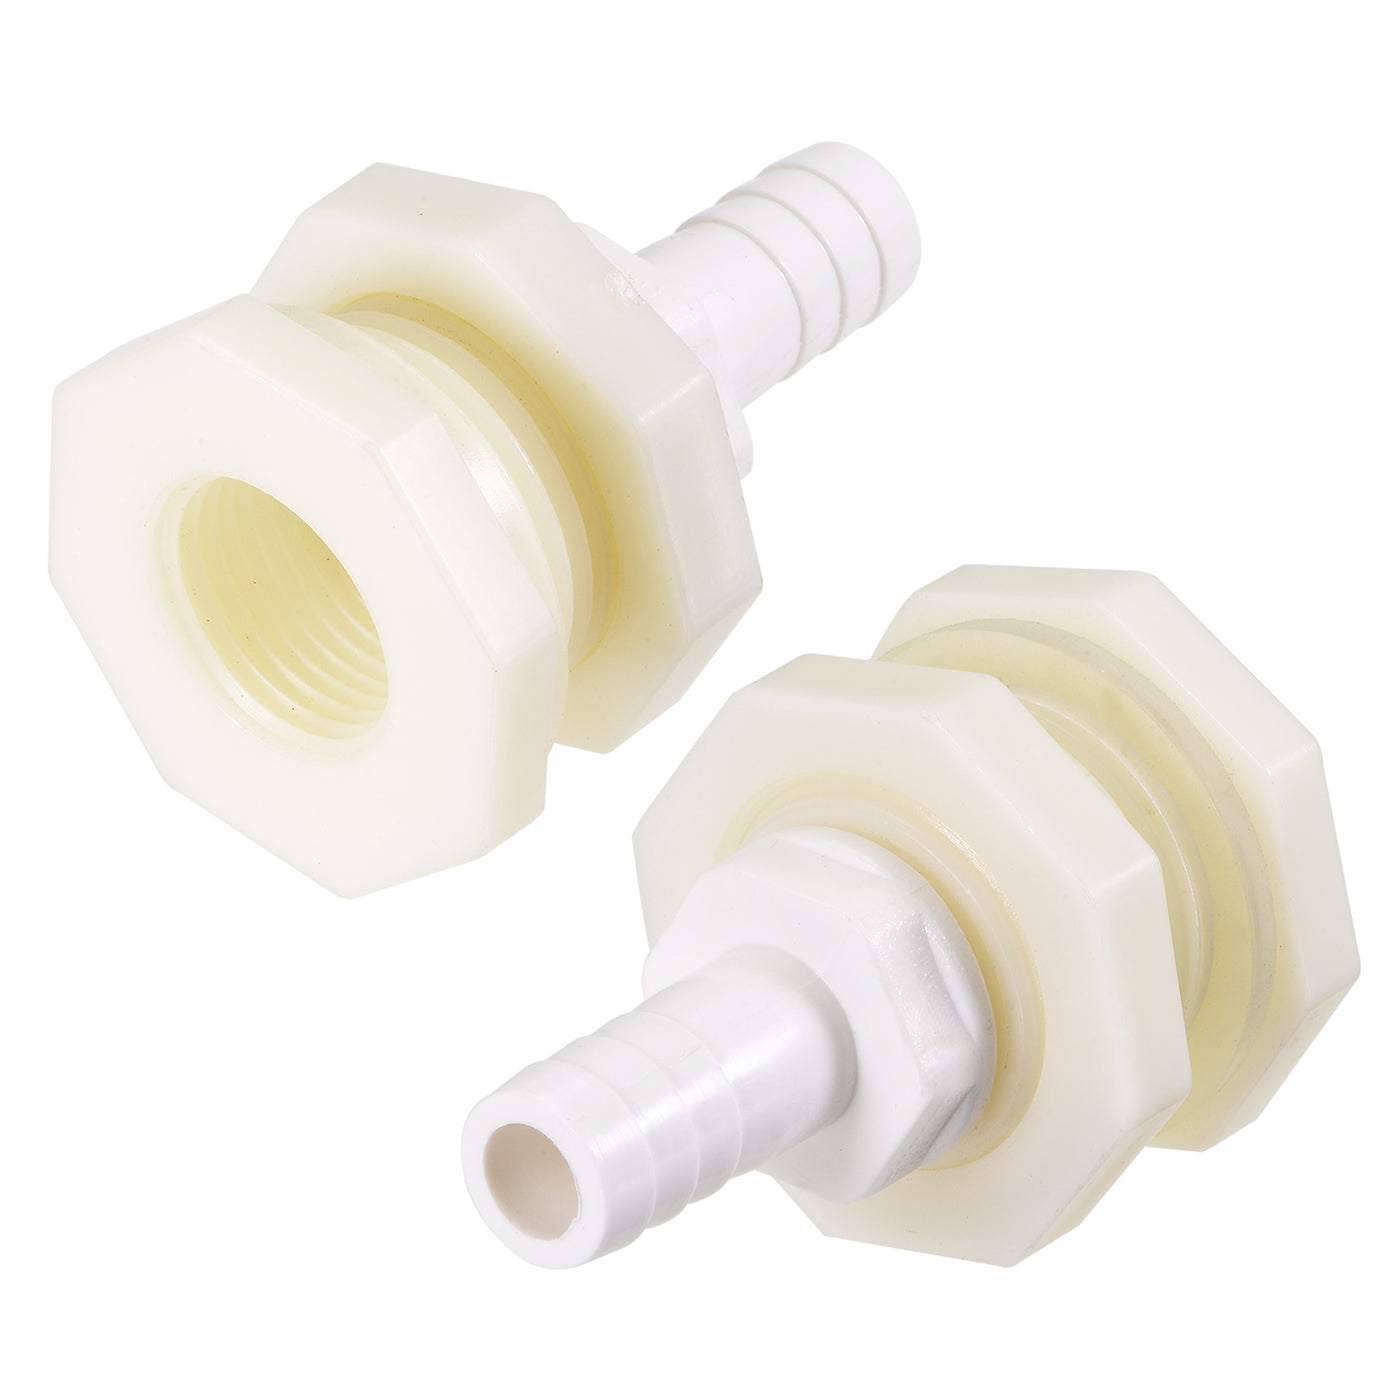 uxcell Uxcell Bulkhead Fitting Adapter 12mm Barbed x G1/2 Female ABS White for Aquariums, Water Tanks, Tubs, Pools 2Pcs